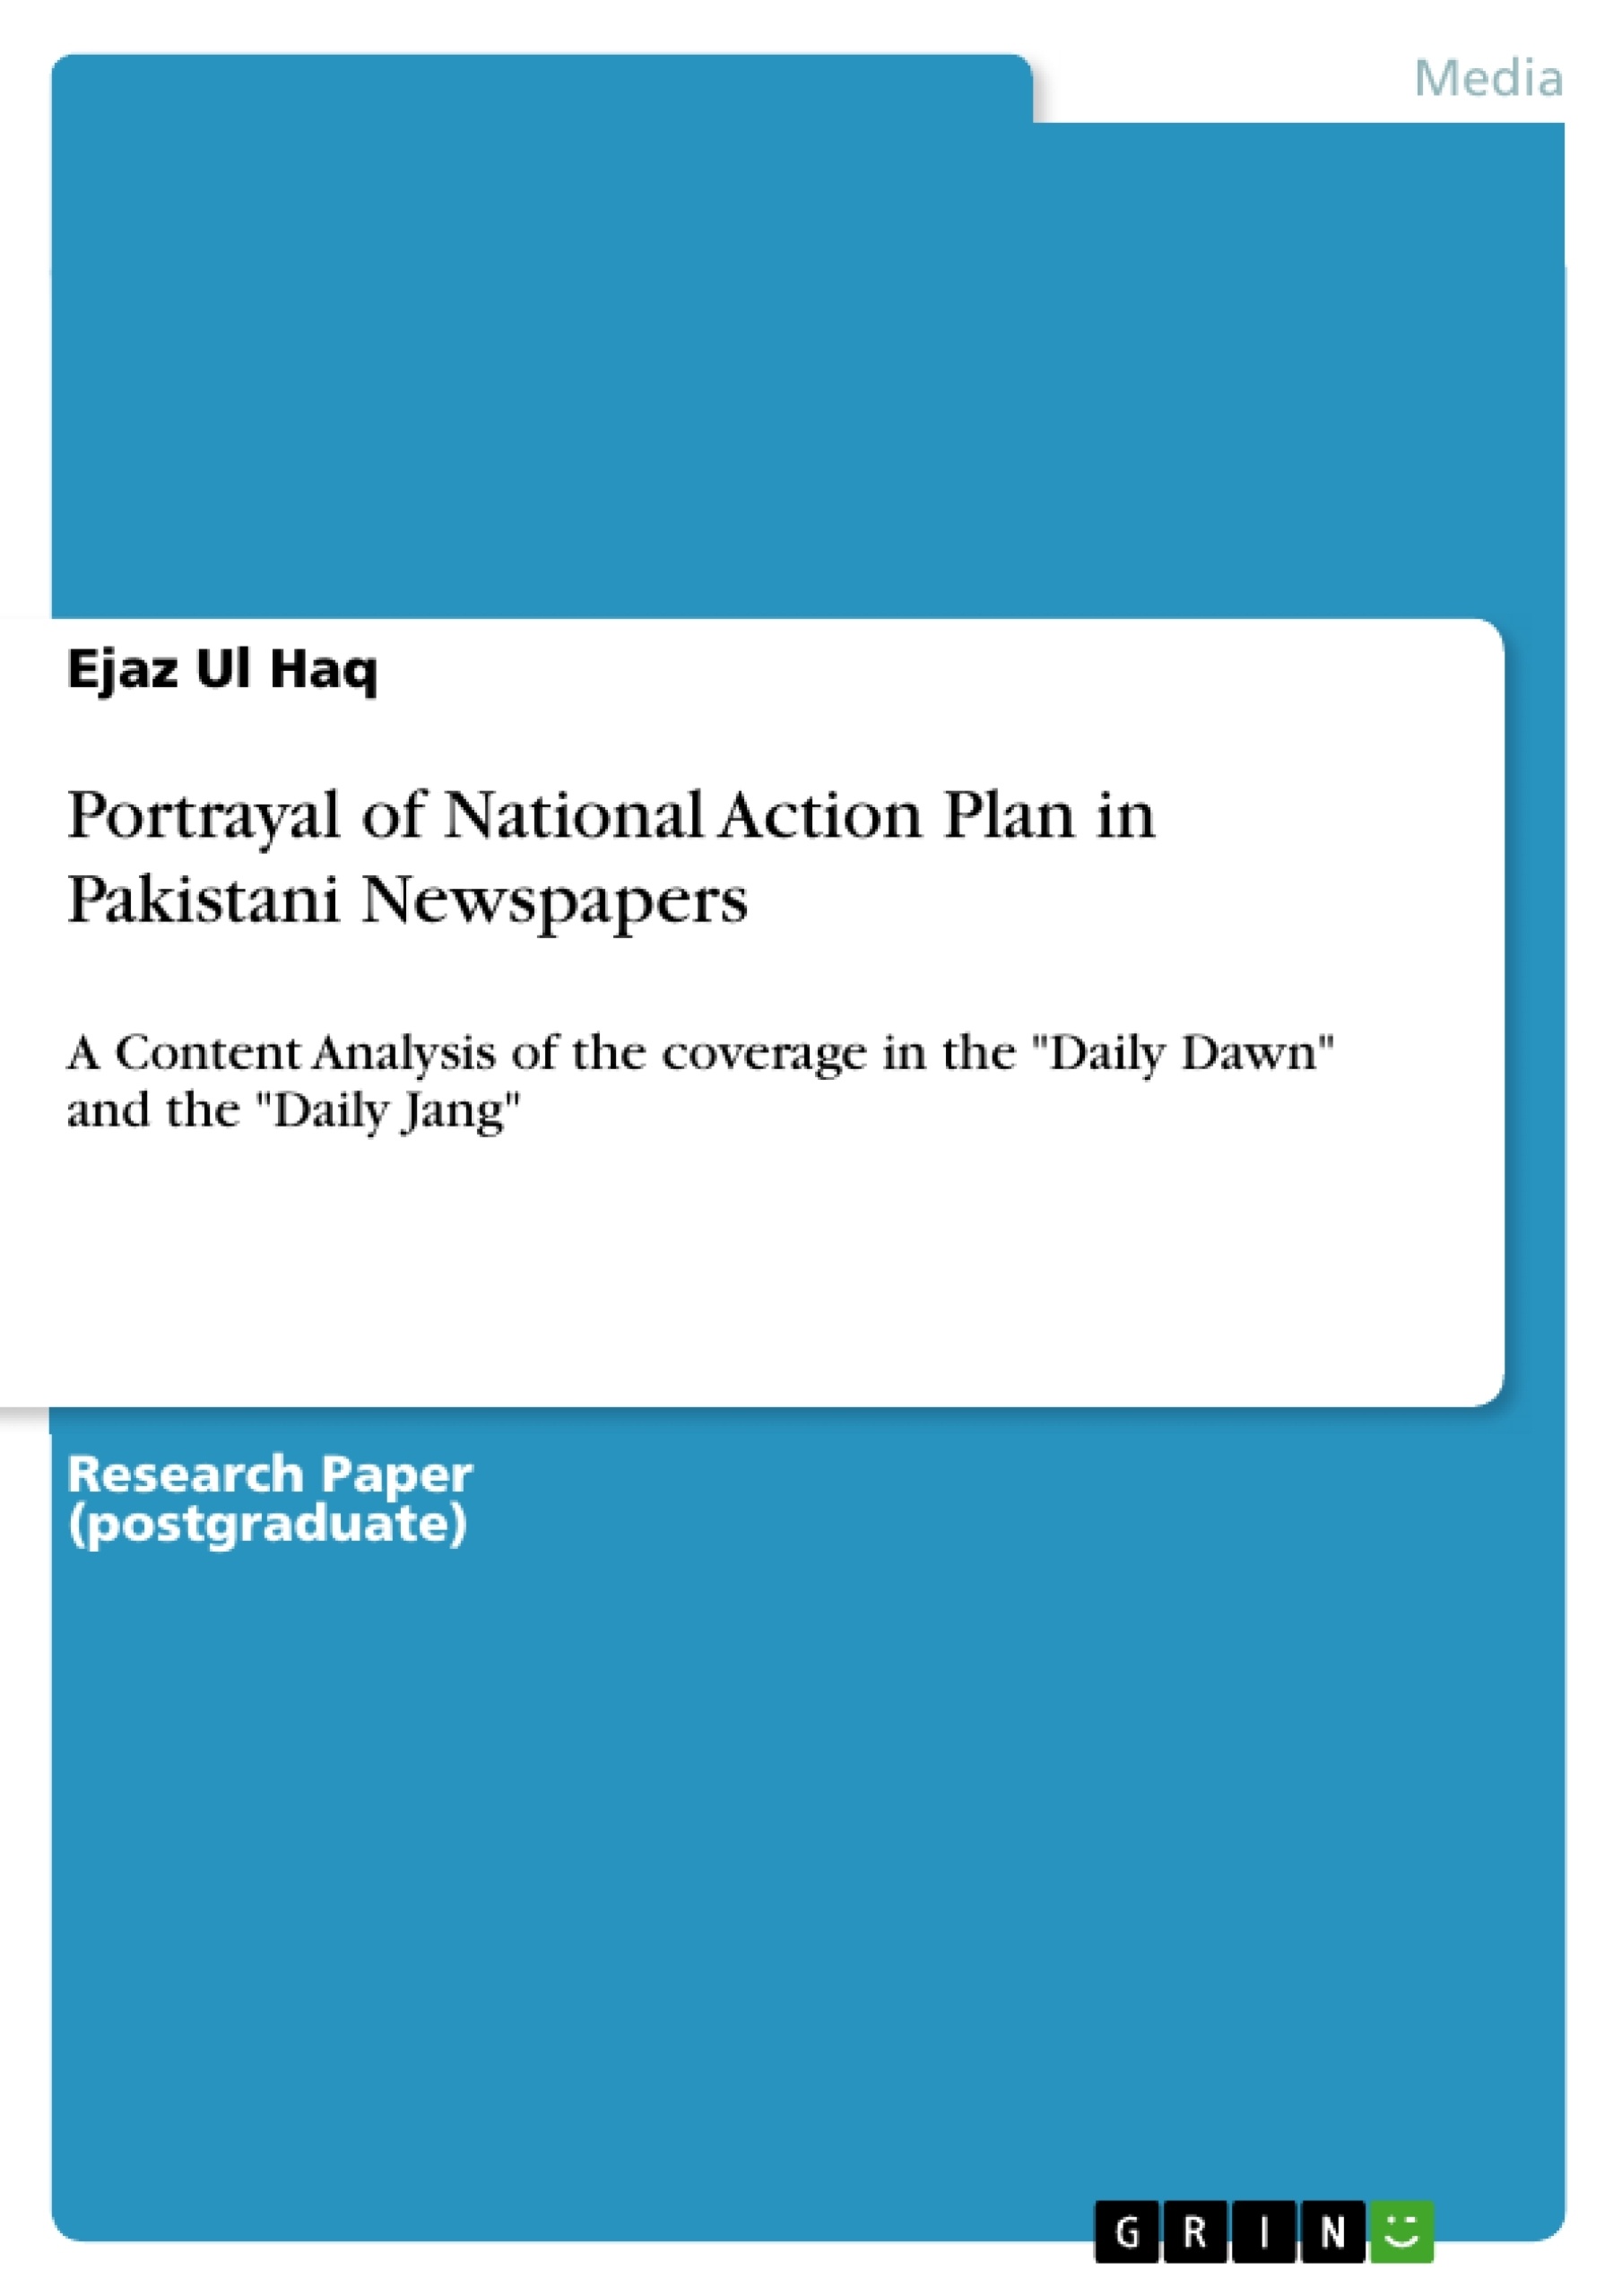 Título: Portrayal of National Action Plan in Pakistani Newspapers